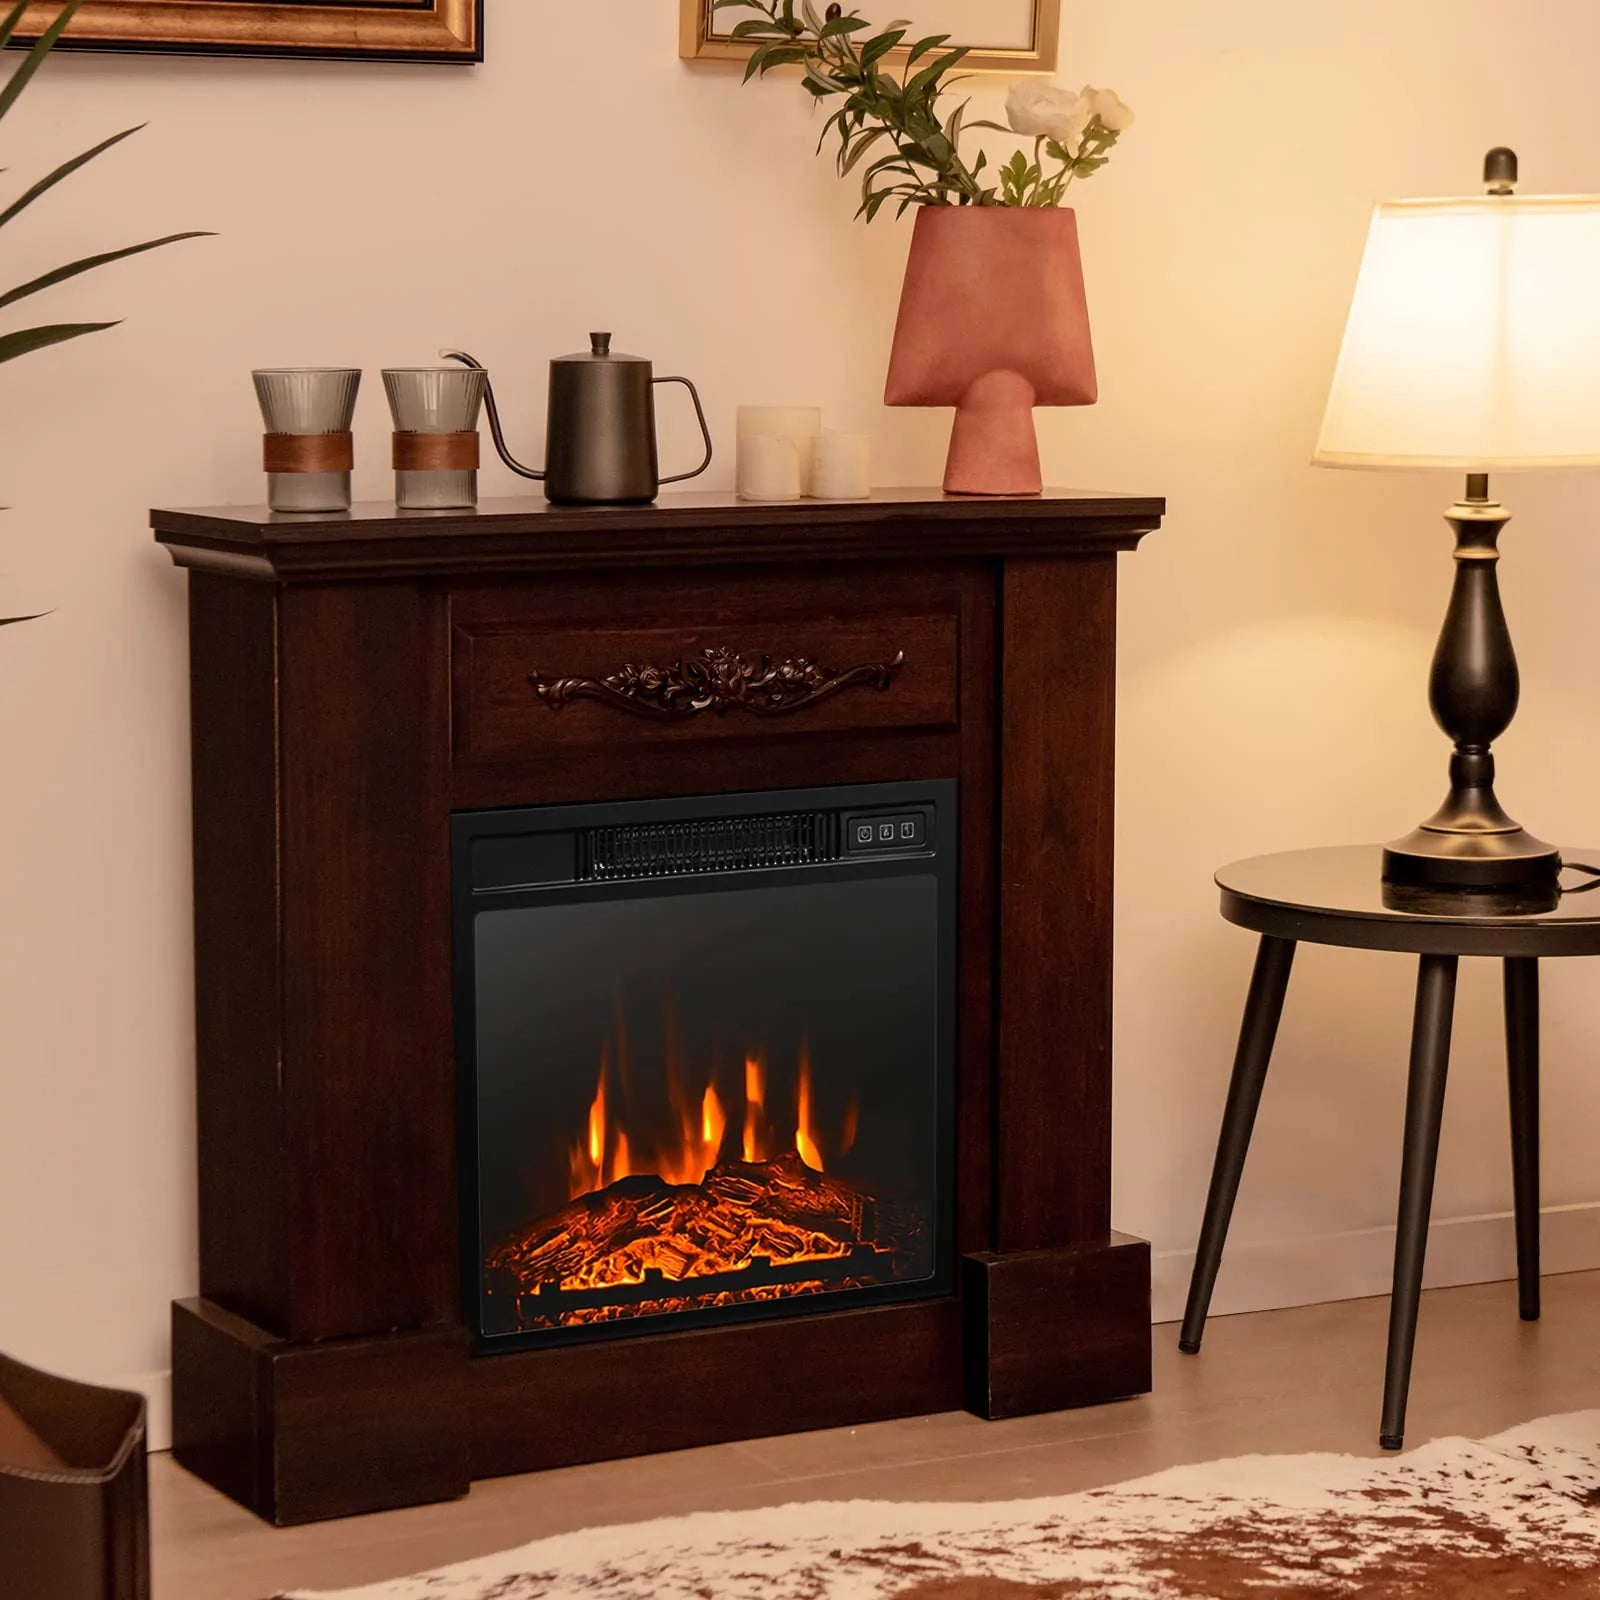 5 Buying Guide for Electric Fireplaces